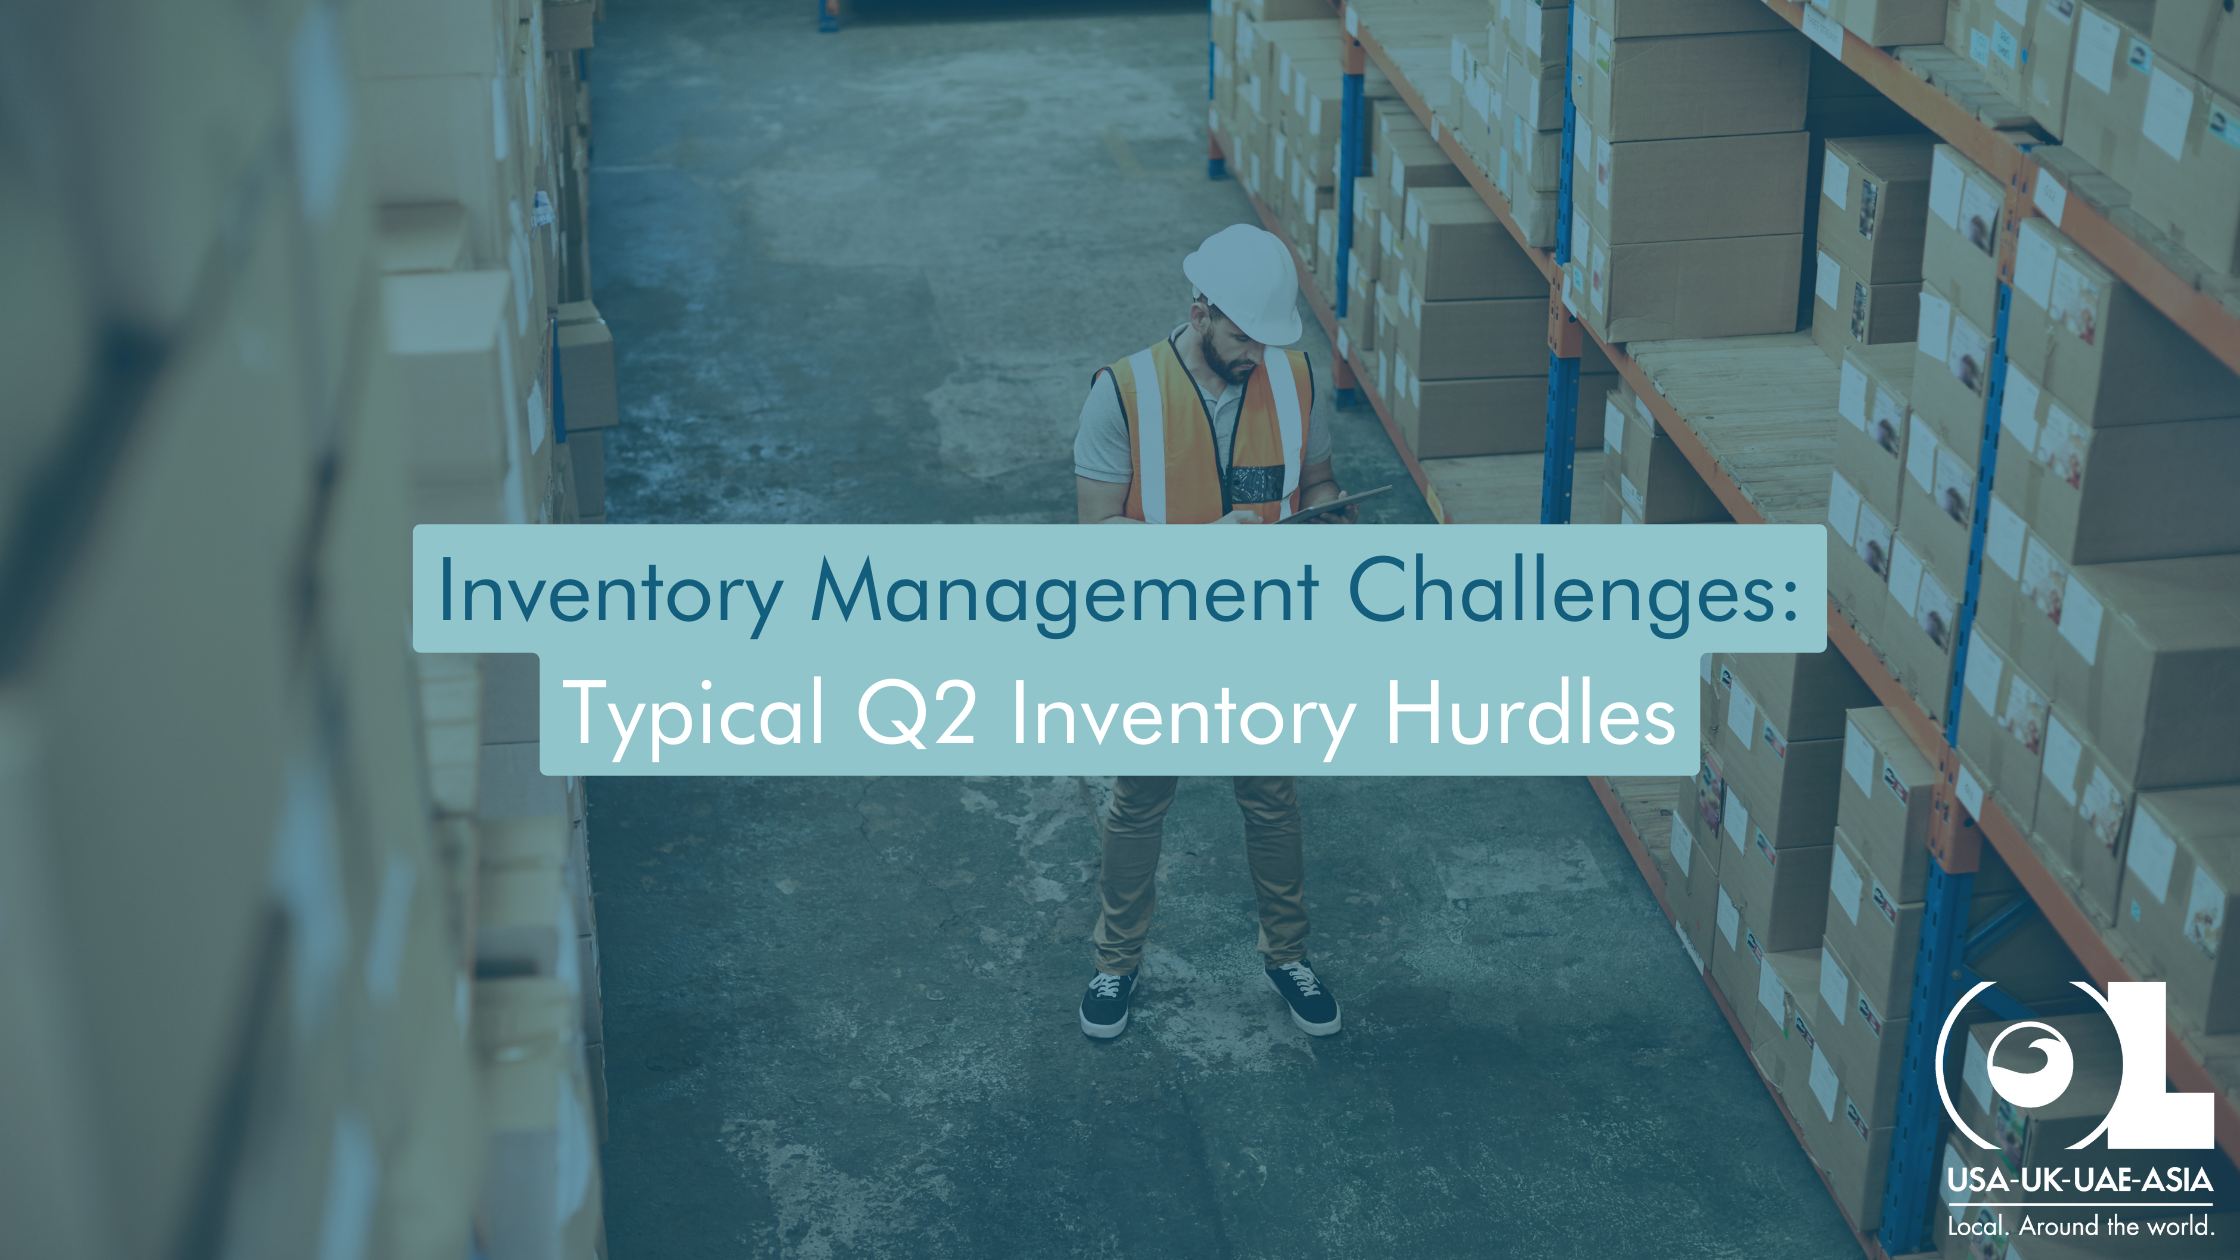 Inventory-Management-Challenges-Typical-Q2-Inventory-Hurdles-OL-USA